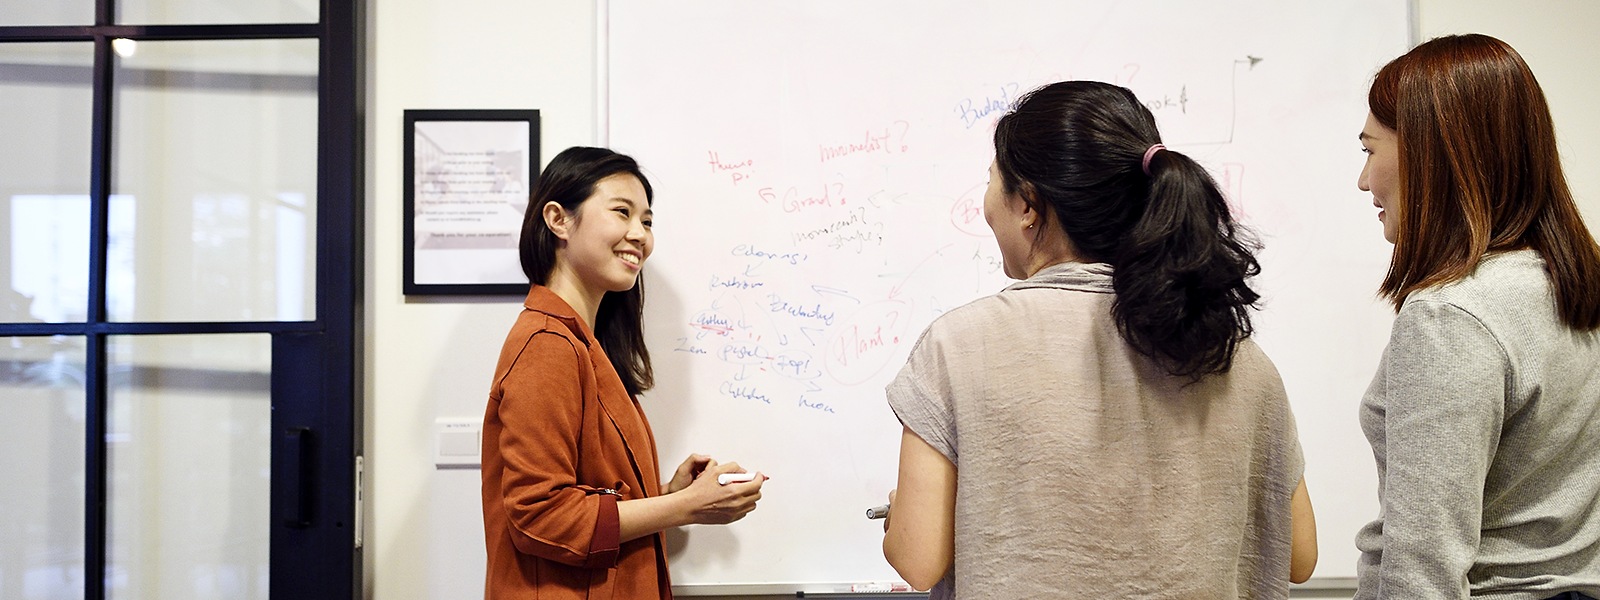 Women brainstorming in an office standing around a whiteboard.